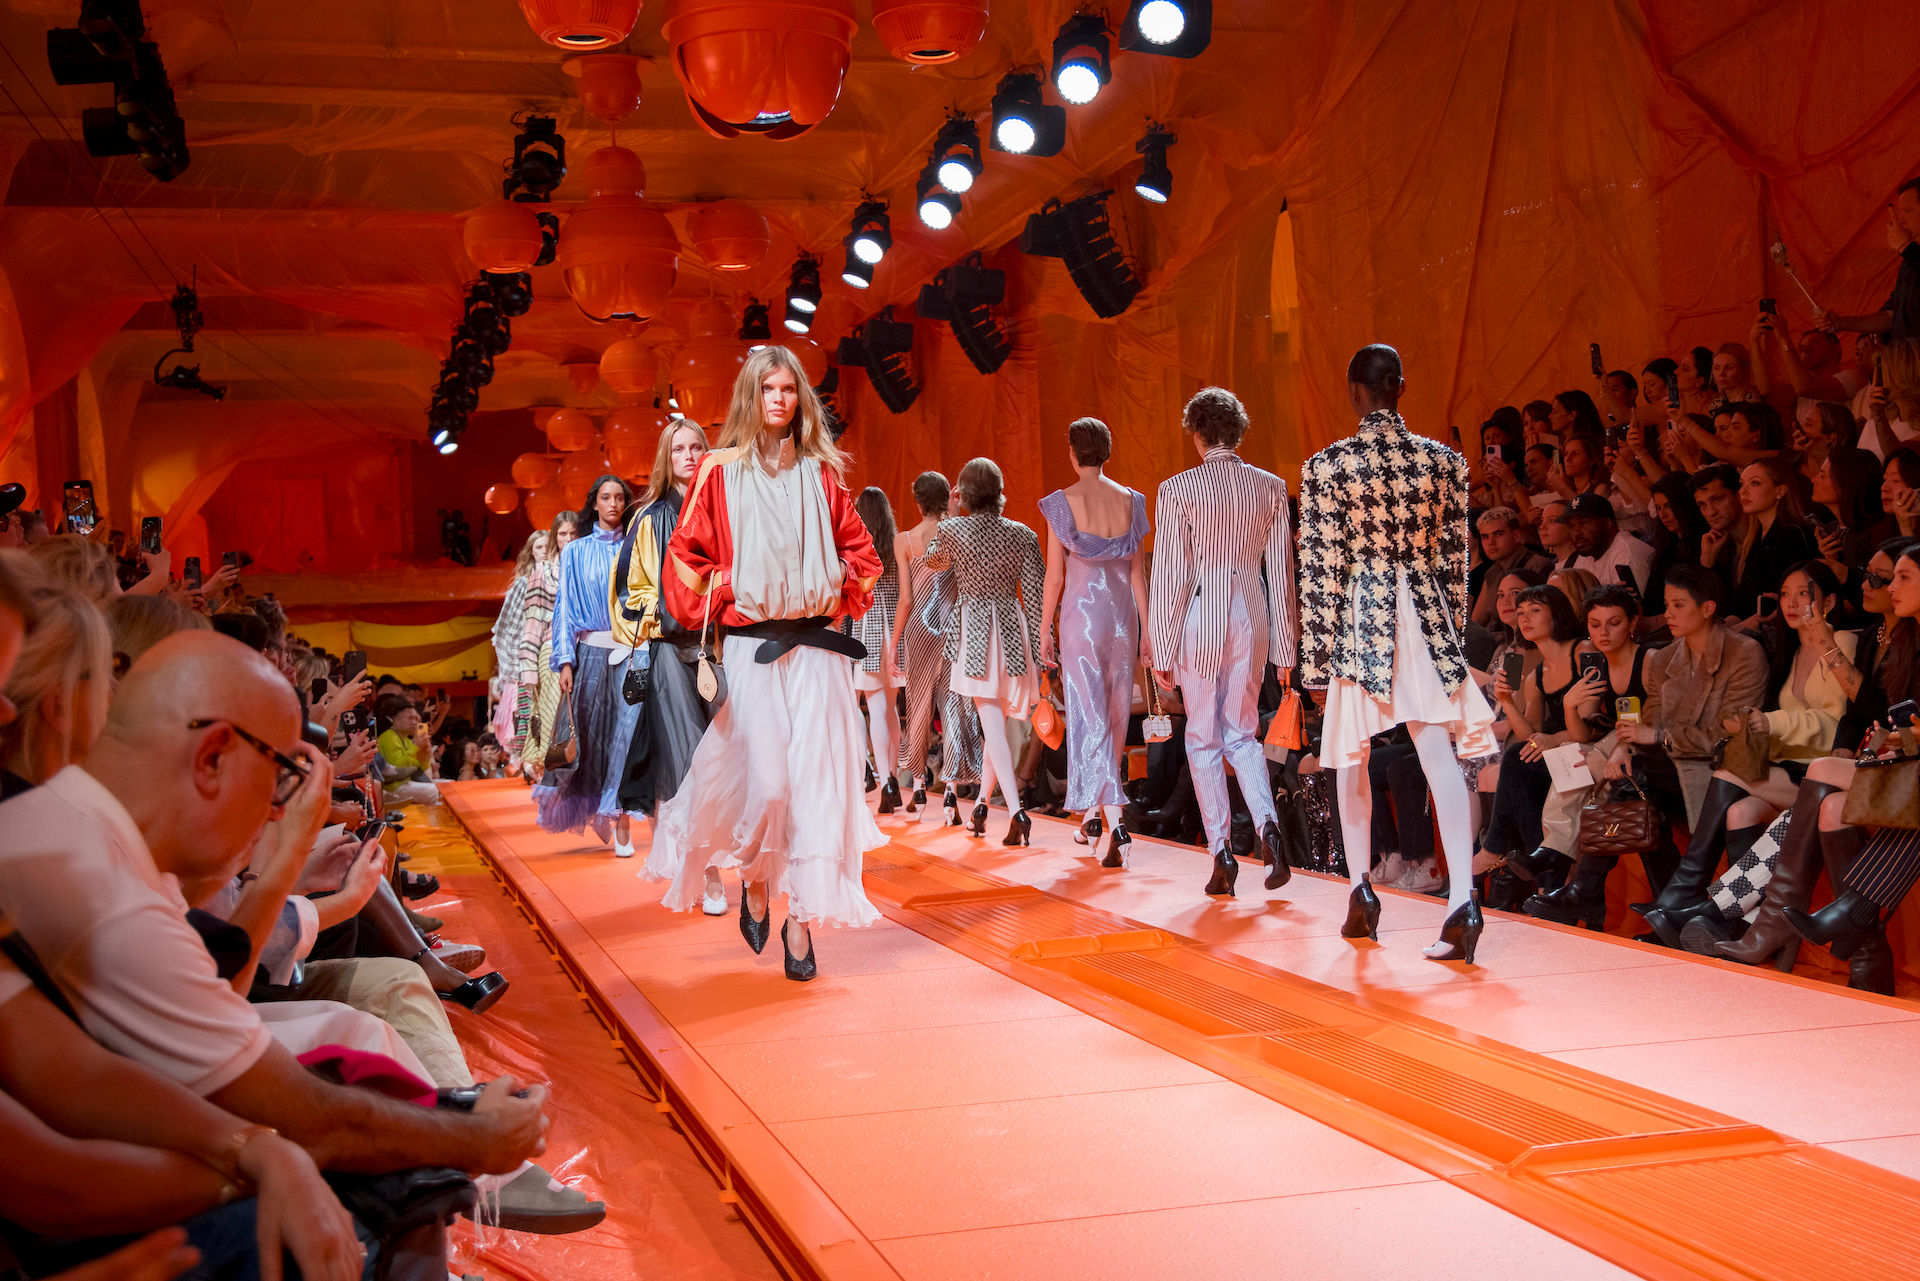 LOUIS VUITTON SPRING SUMMER 2023 PREVIEW // NEW BIG LV RTW, BAGS +